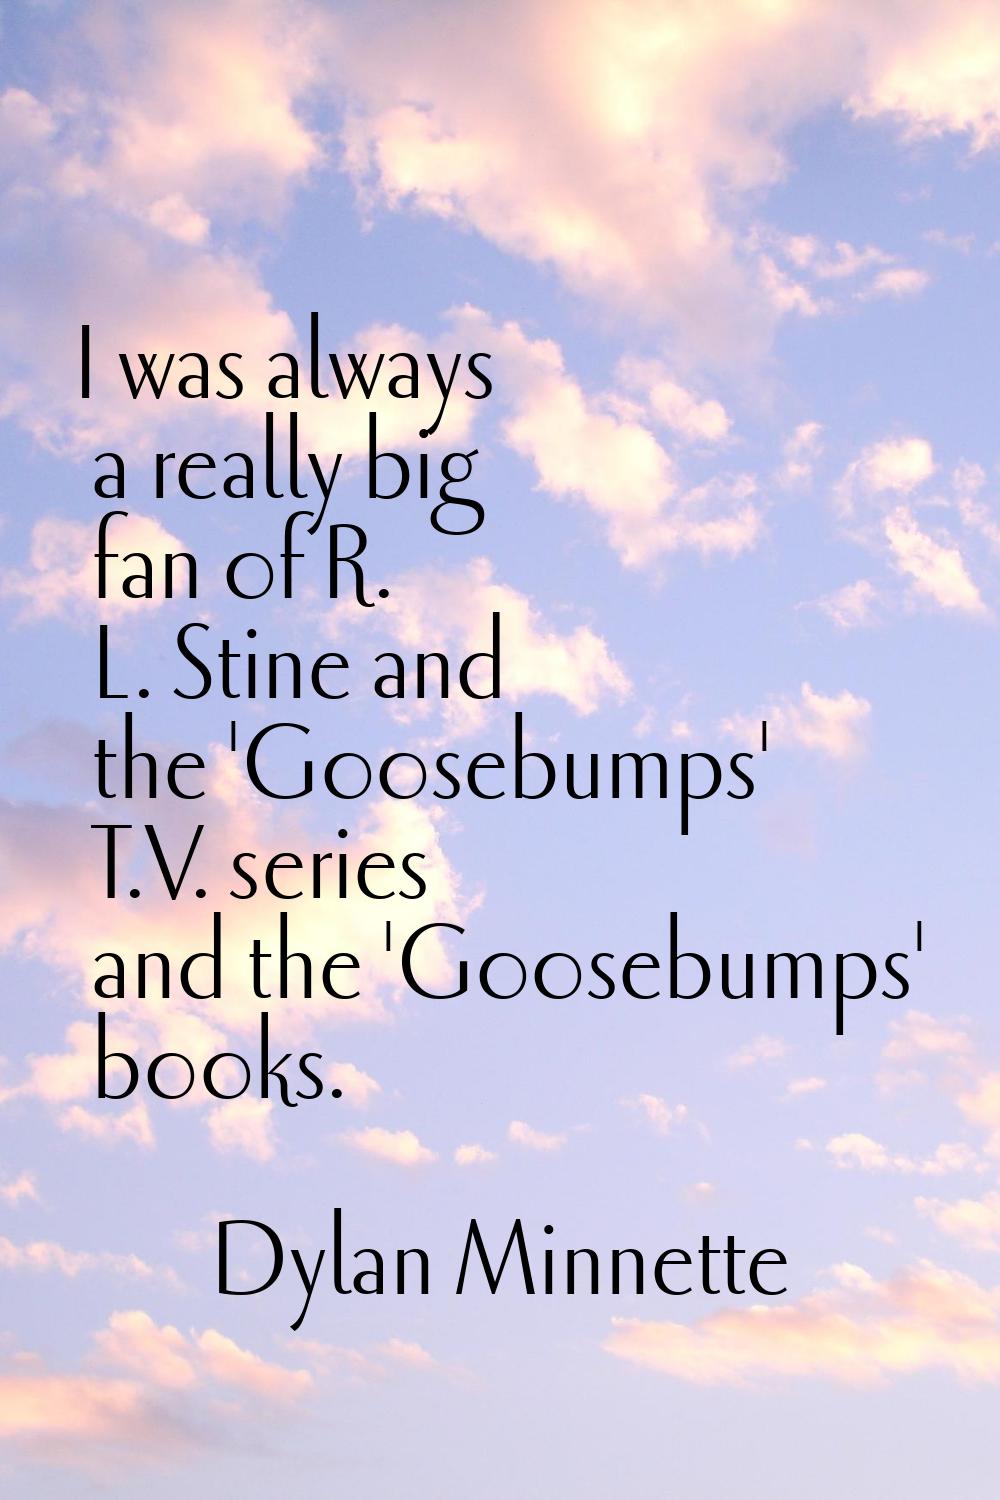 I was always a really big fan of R. L. Stine and the 'Goosebumps' T.V. series and the 'Goosebumps' 